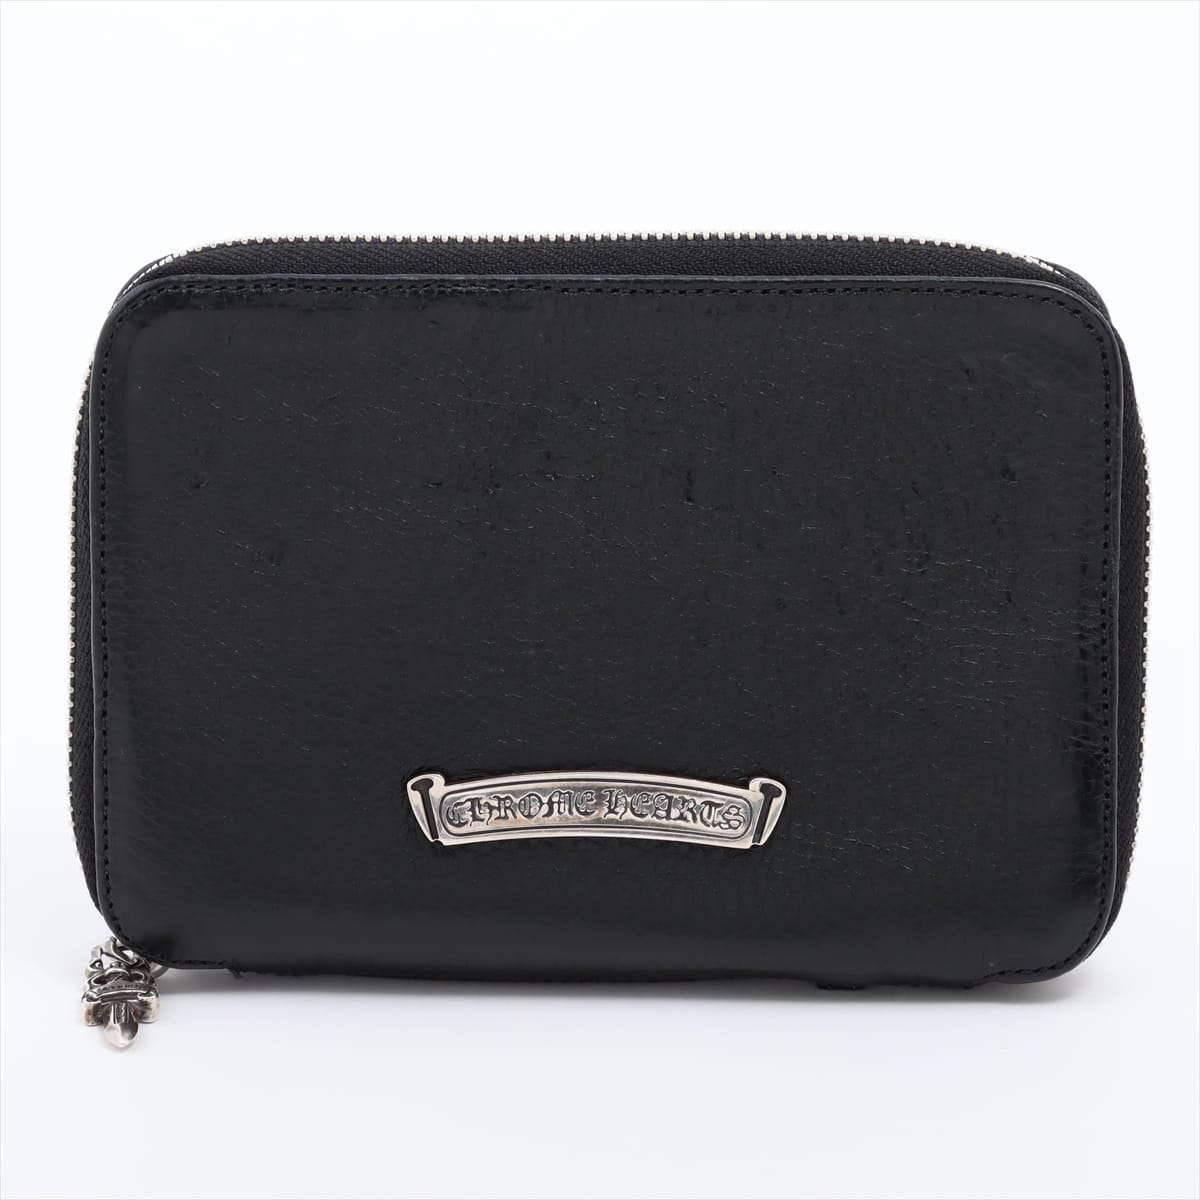 Chrome Hearts Wallet Leather & 925 Dagger zip Heavy leather Comes with a detachable card case